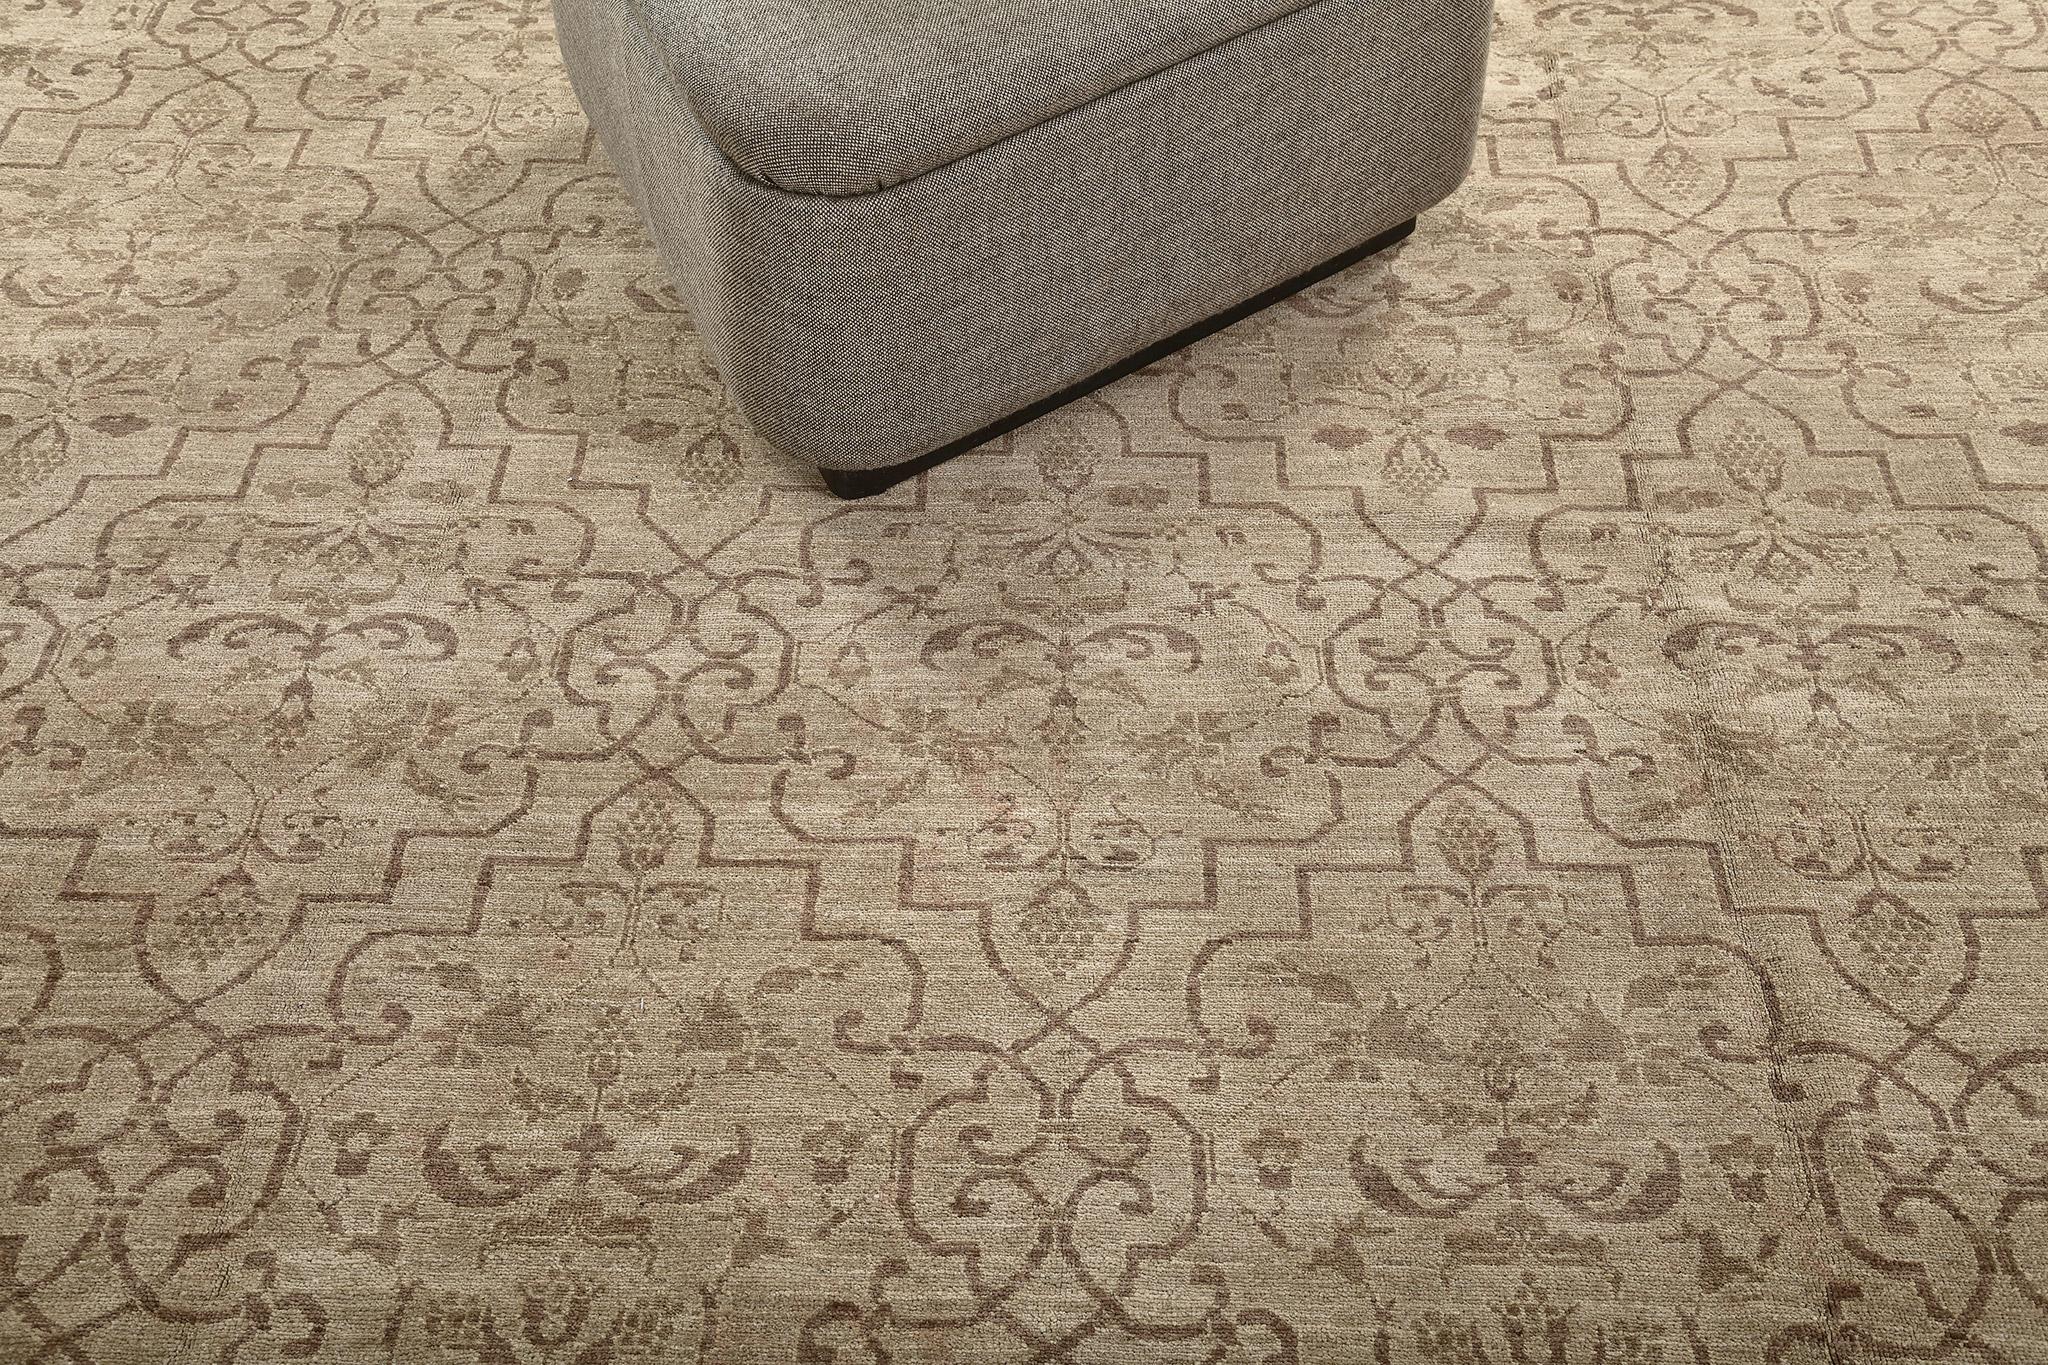 This elegant and timeless Transitional type of rug made from vegetable dye has an intricate symmetric pattern and has clear grandiose medallions all over the design. The details of these patterns are perfectly spun in a cream field. If you want a